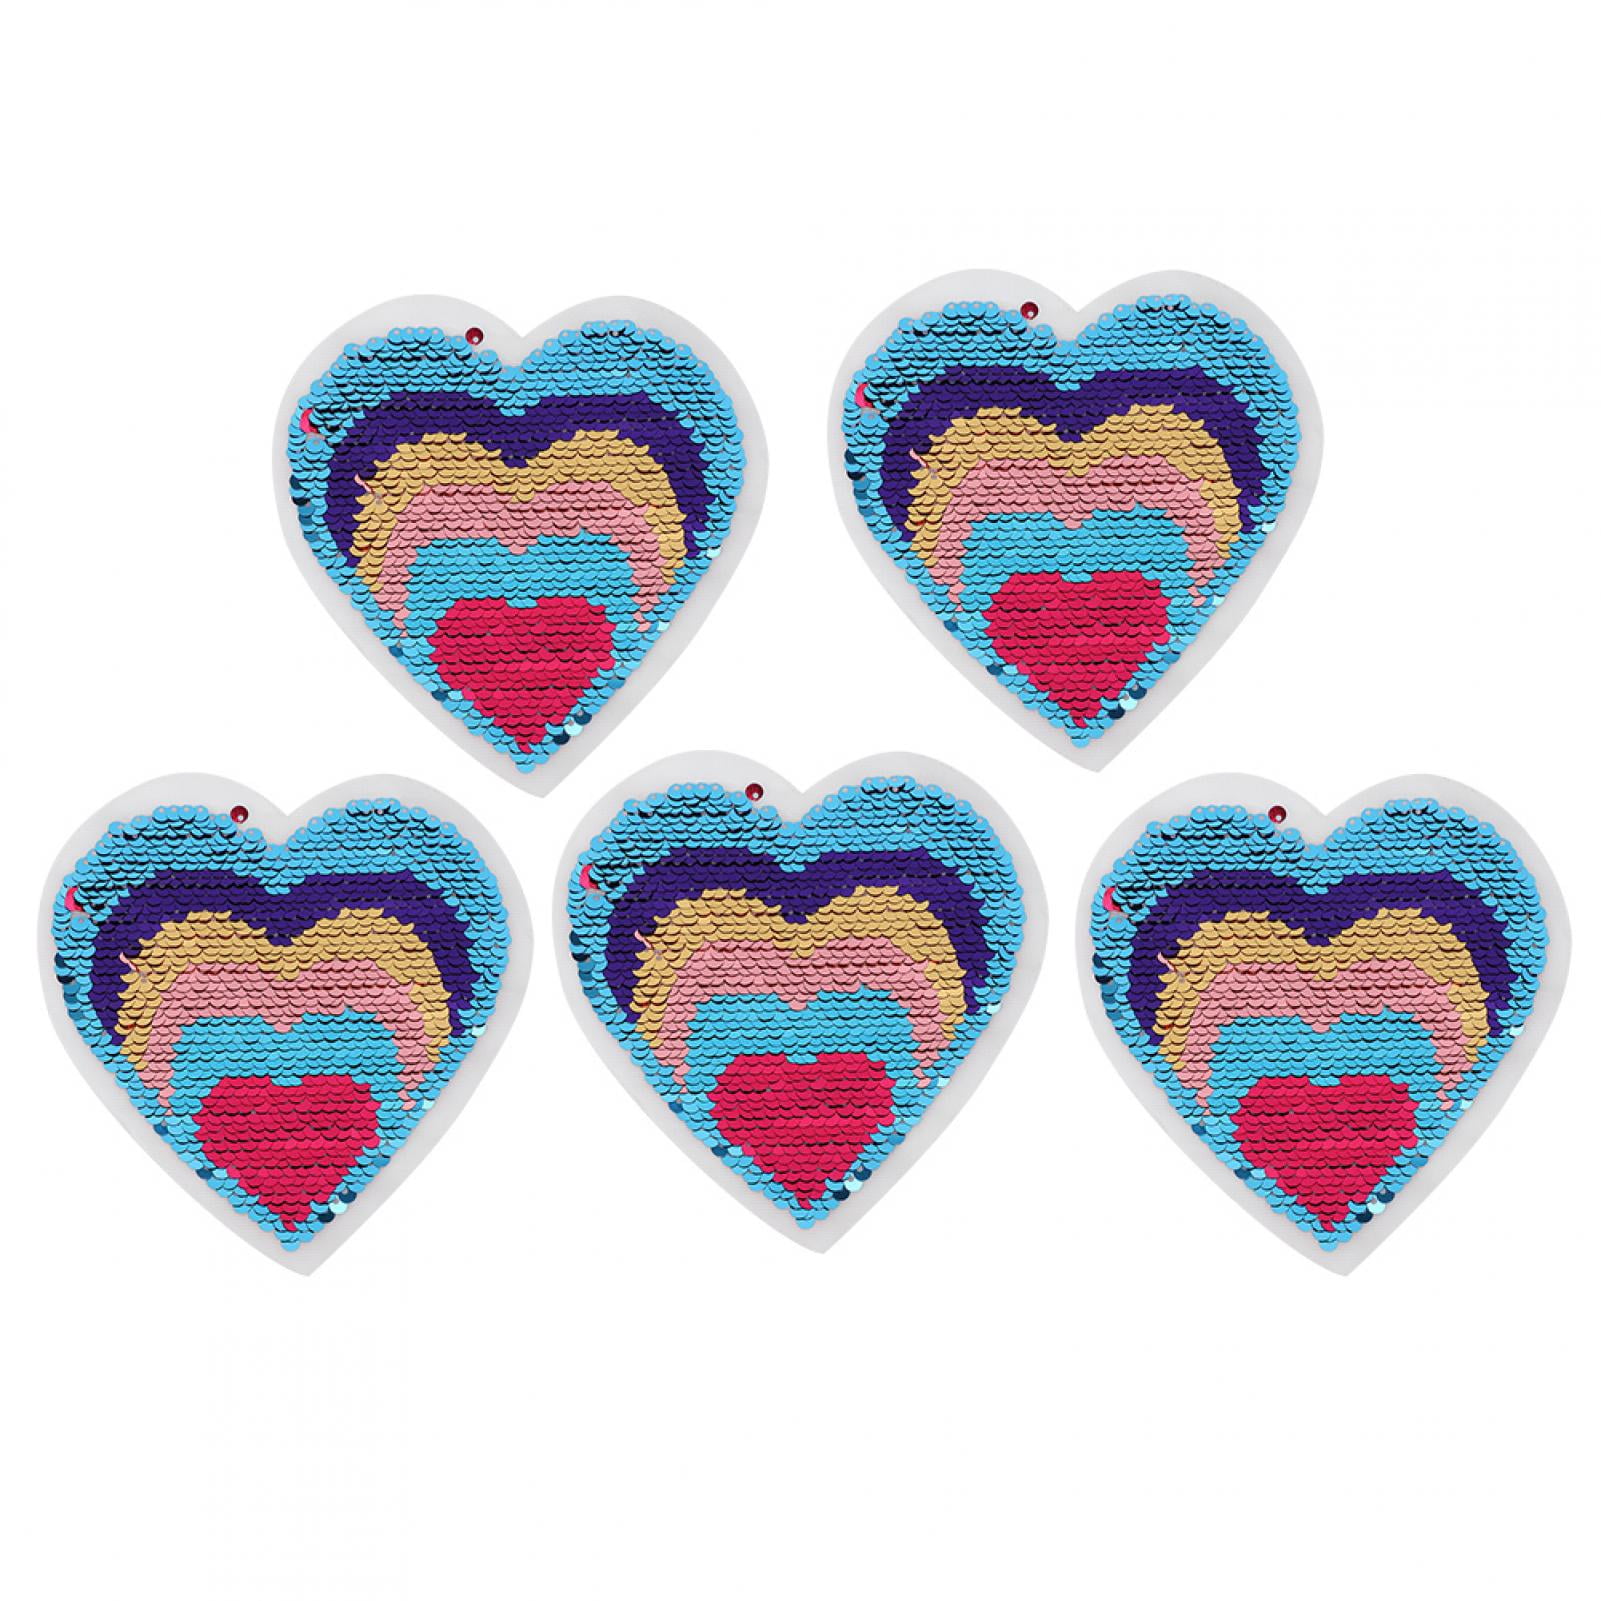 LOVE 5PCs Cartoon Sequins Patches For Clothes Garments Sewing DIY Craft 